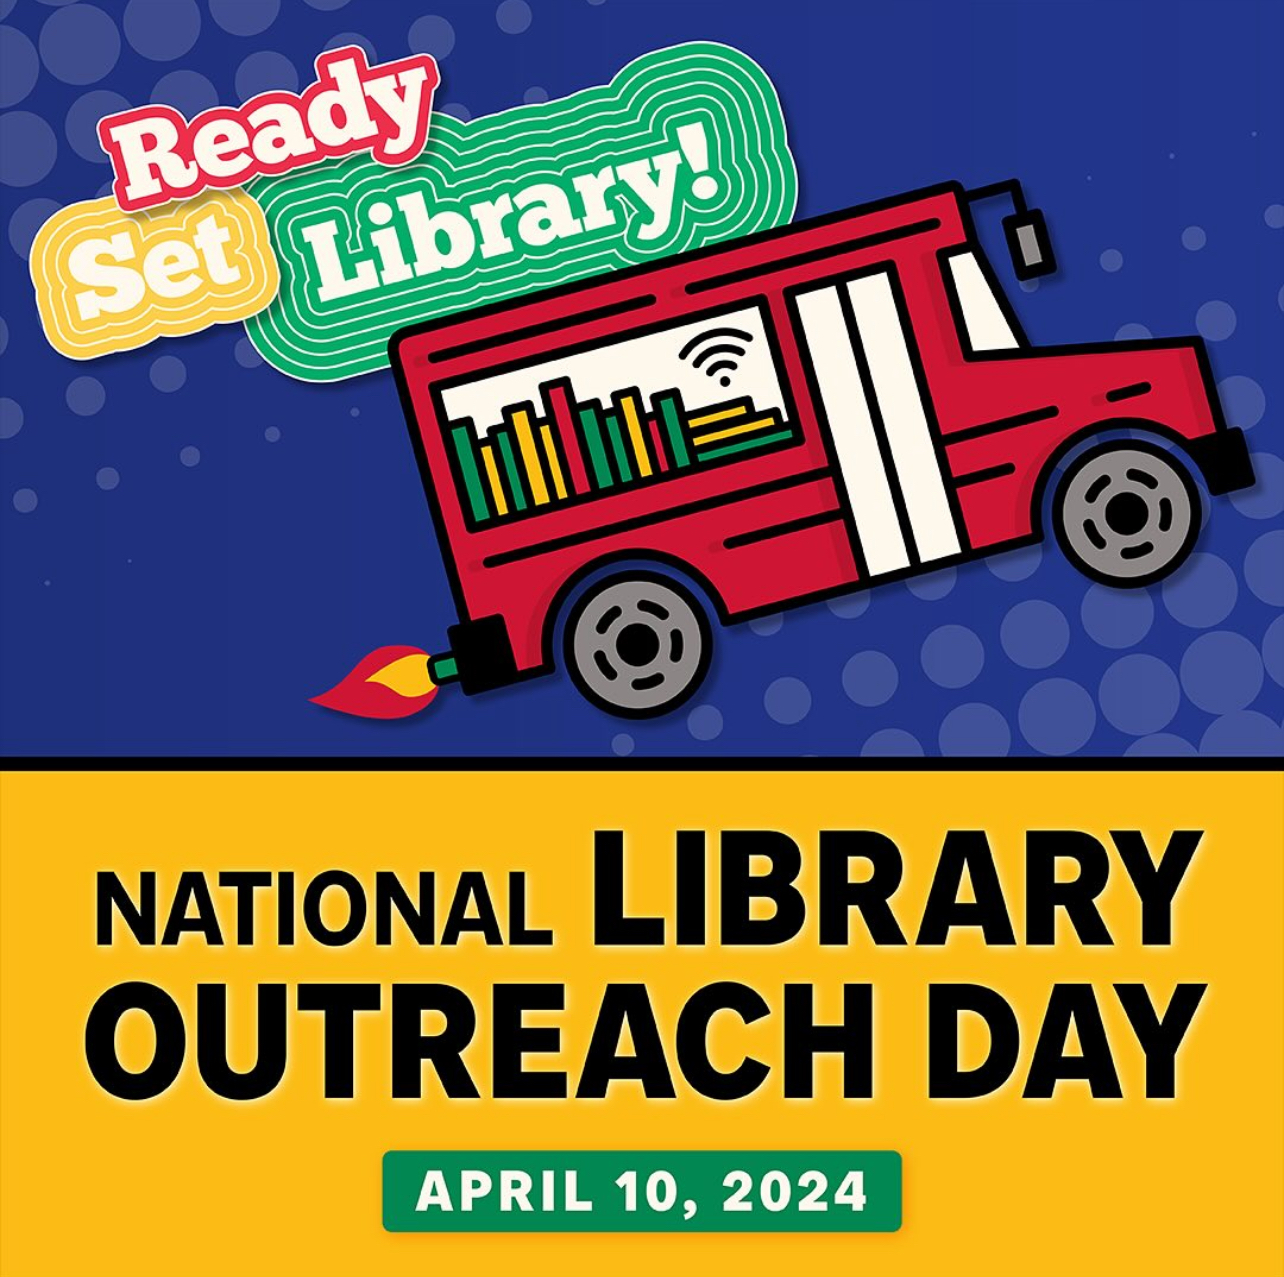 National Library Outreach Day April 10, 2024